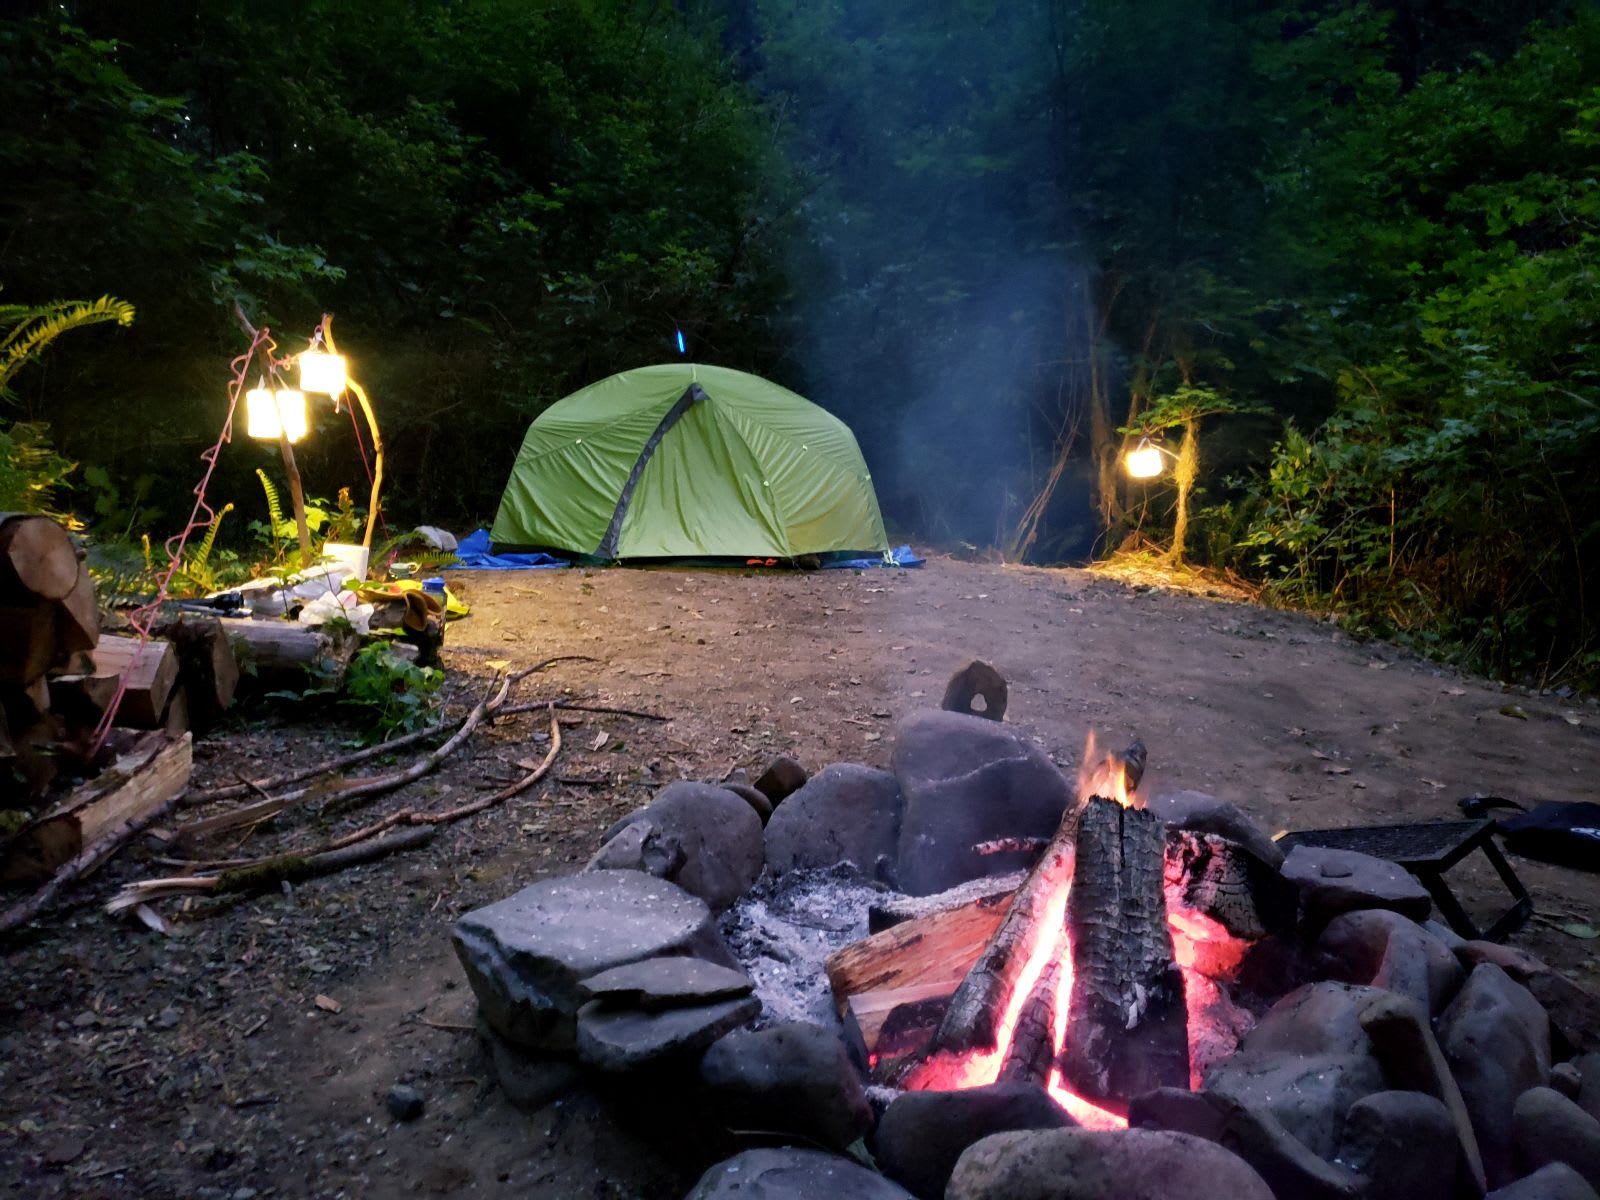 Camping in forest, next to a creek.